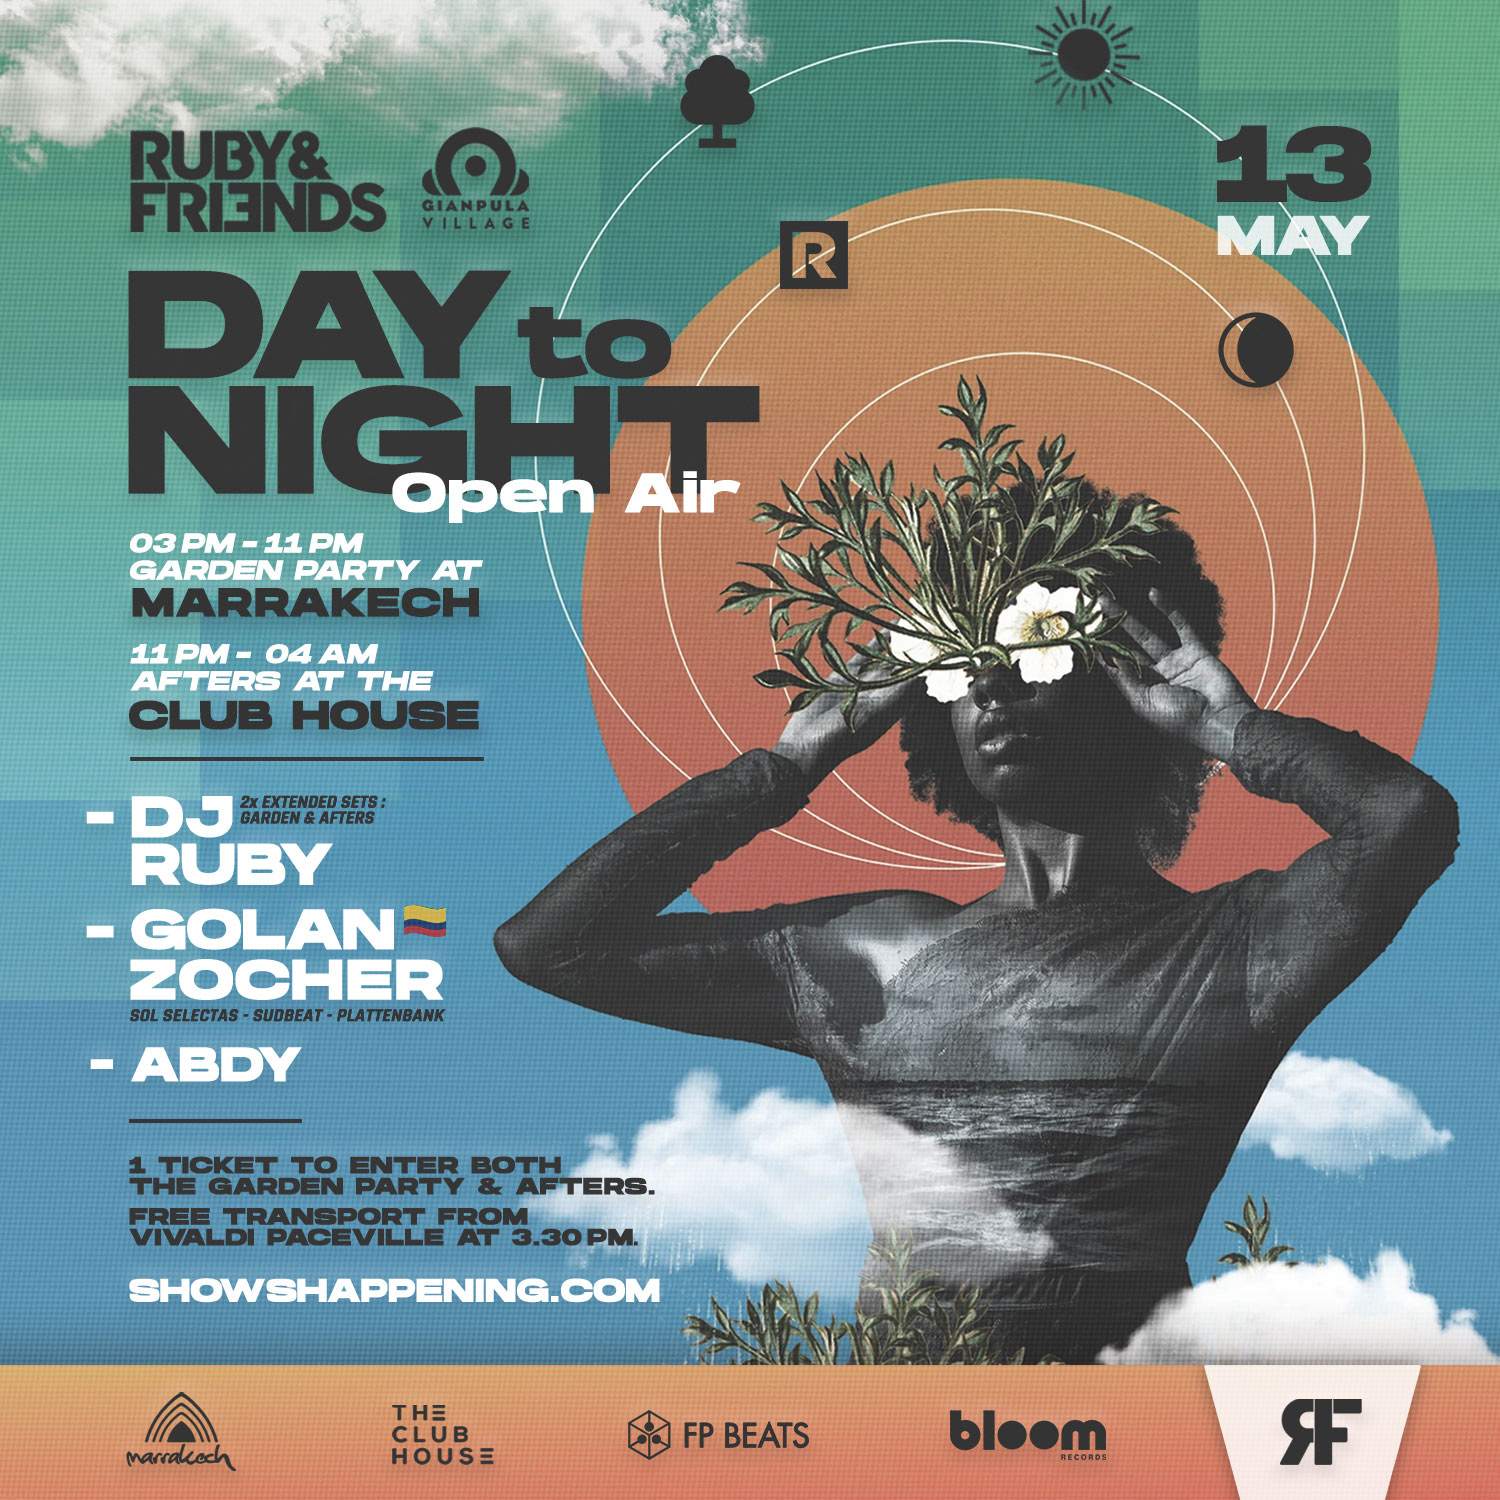 Ruby&friends Day To Night - Open Air Garden Party at Marrakech + Afters at Club House - フライヤー表